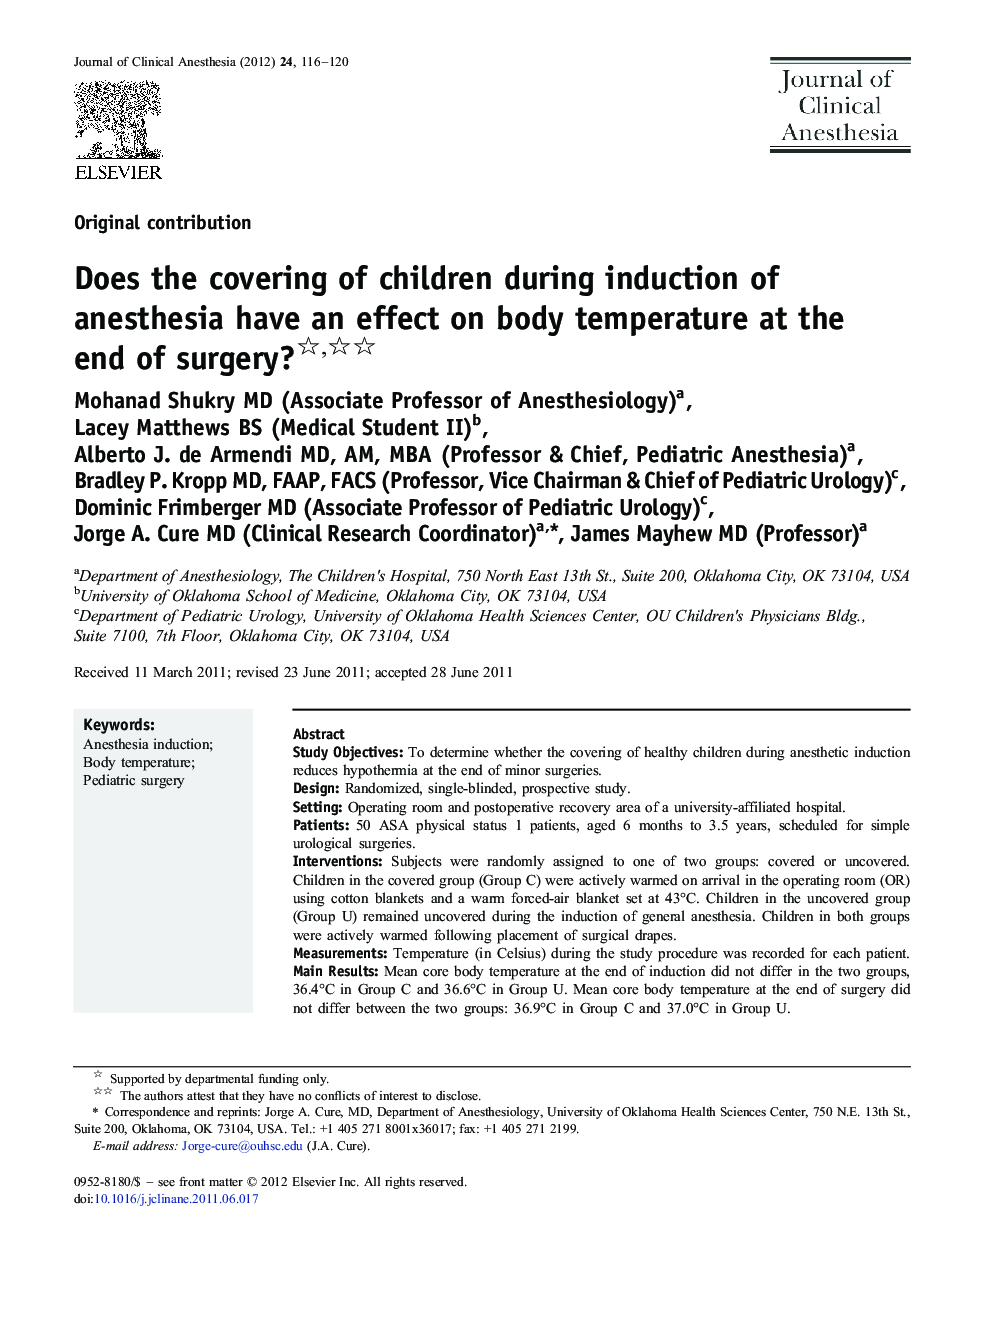 Does the covering of children during induction of anesthesia have an effect on body temperature at the end of surgery? 